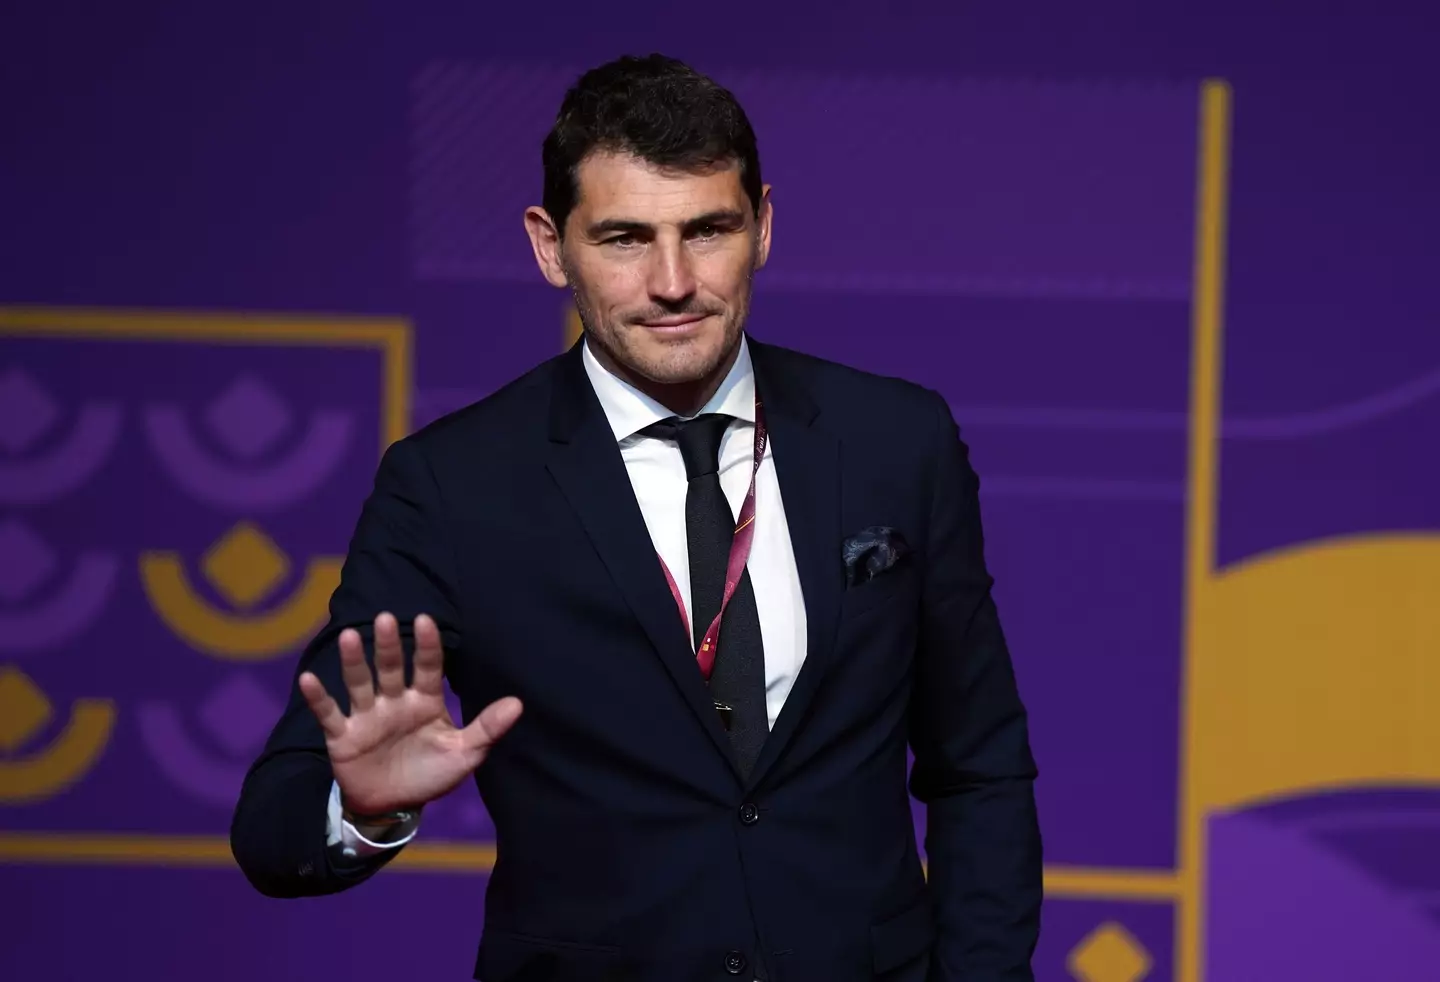 Spain and Real Madrid legend Iker Casillas claimed that his Twitter account was hacked.